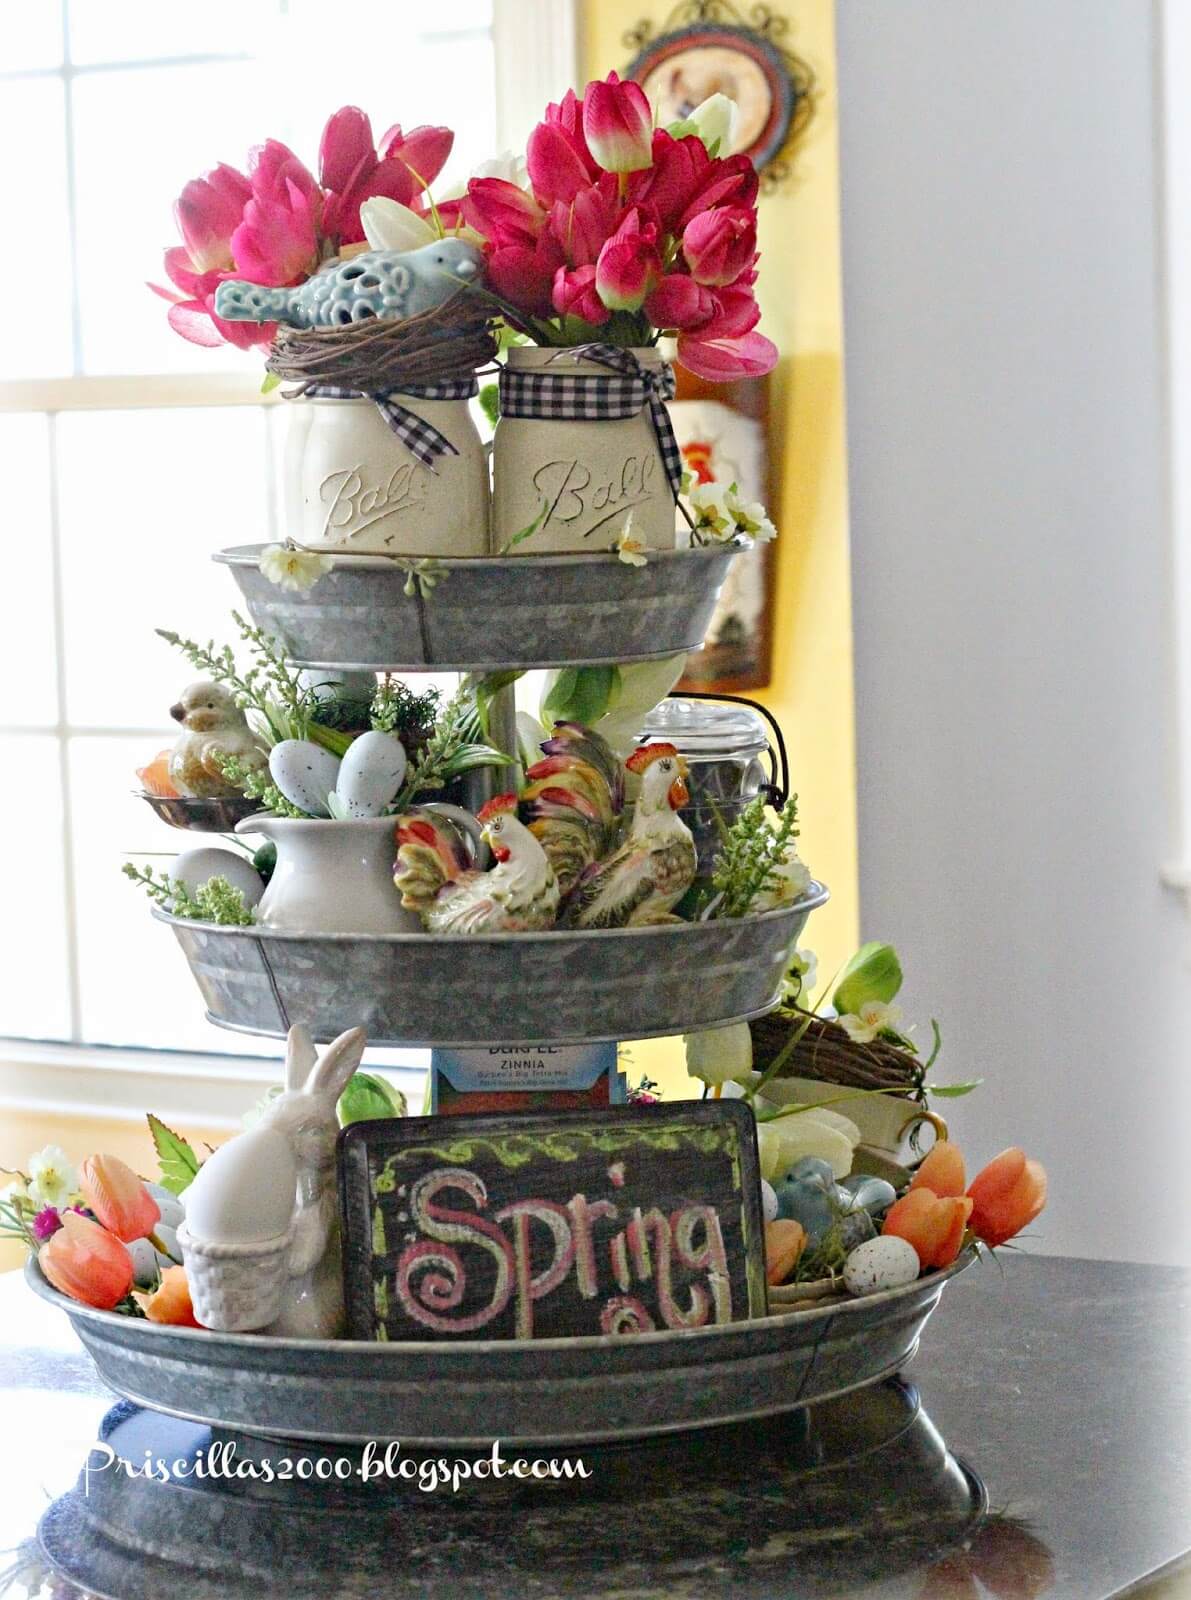 A Tiered Stand Makes a Cheerful Display